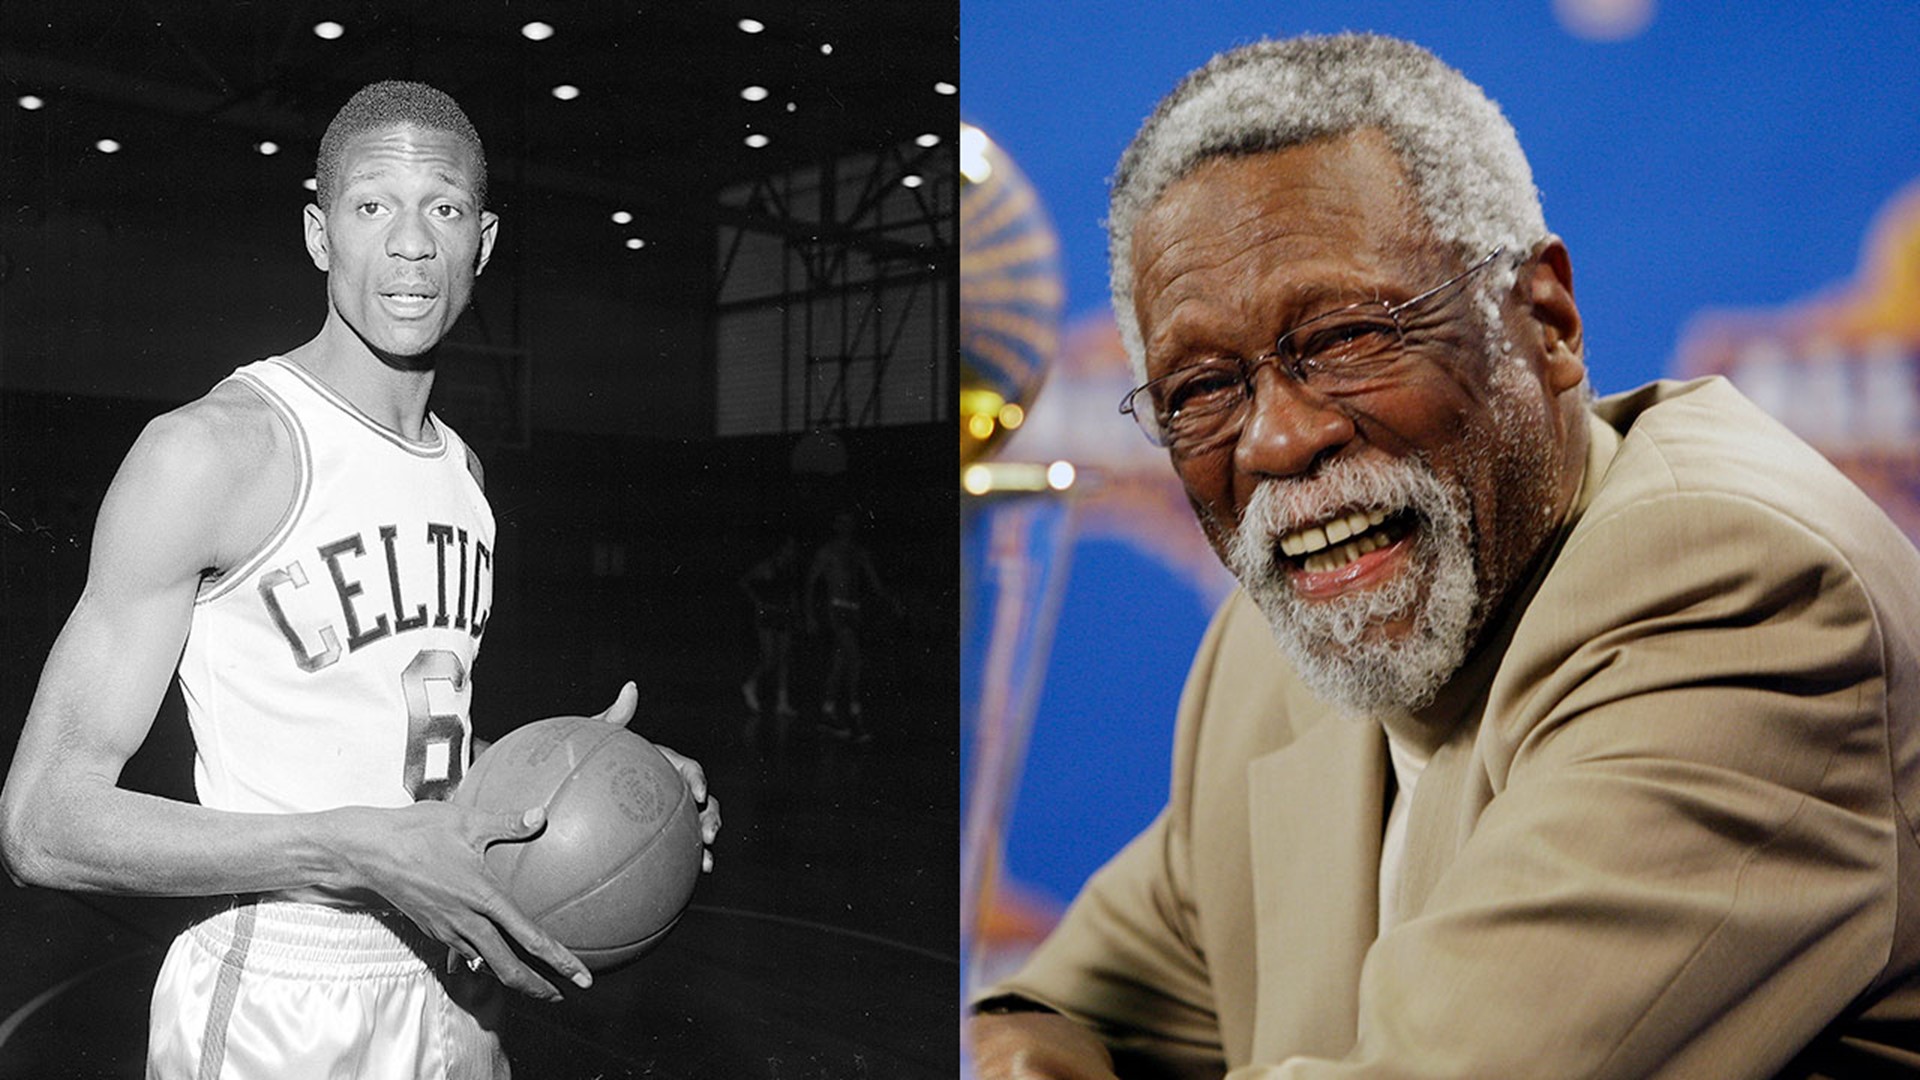 He was one of basketball's greatest players and a champion against discrimination.